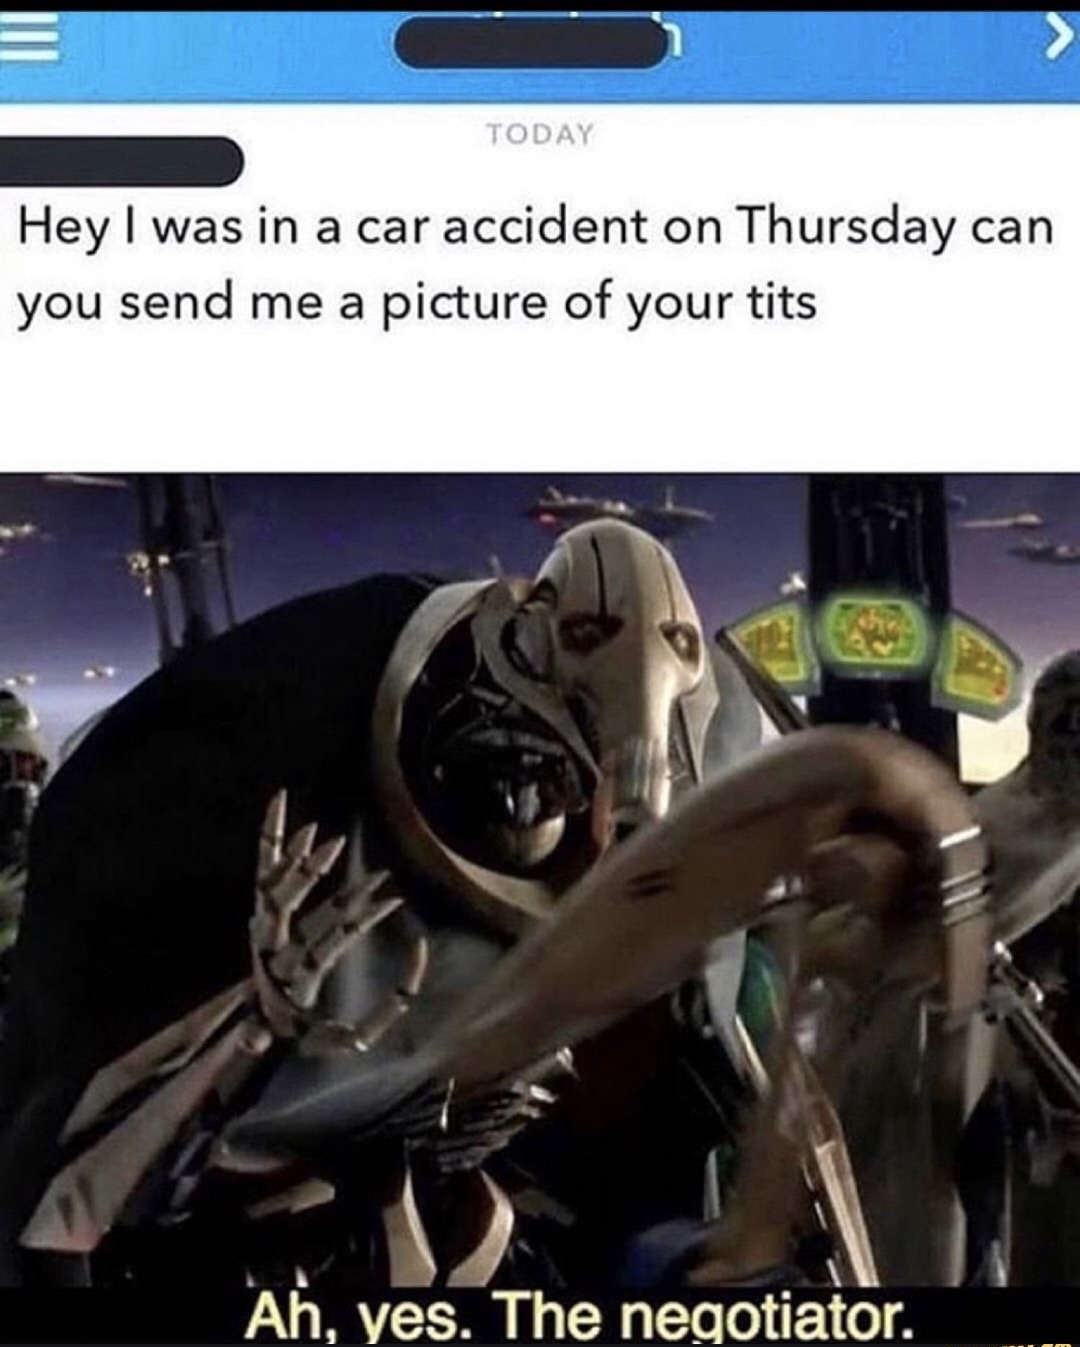 star wars the negotiator meme - Today Hey I was in a car accident on Thursday can you send me a picture of your tits Ah, yes. The negotiator.